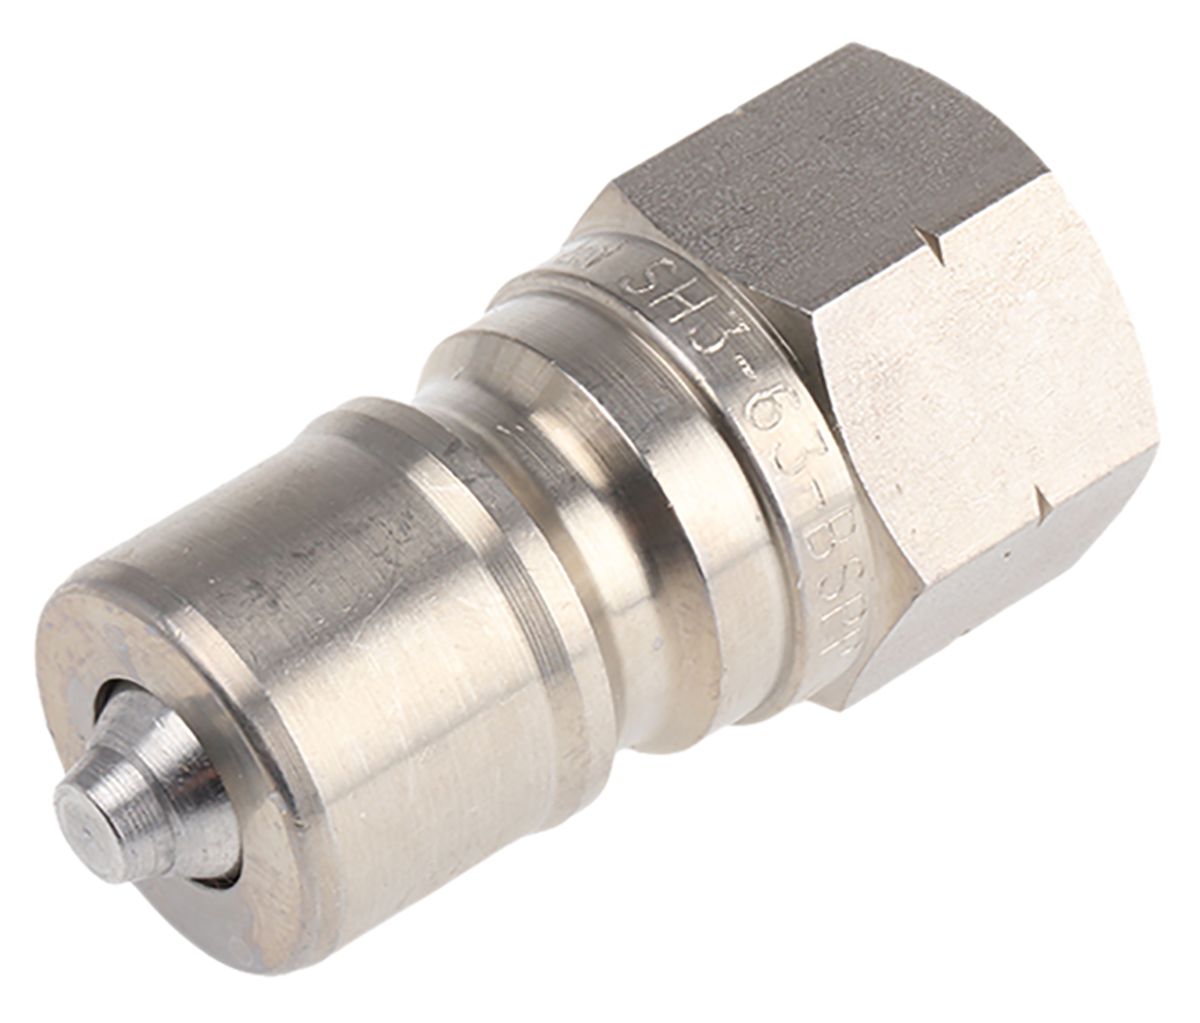 Parker Stainless Steel Male Hydraulic Quick Connect Coupling, G 3/8 Female